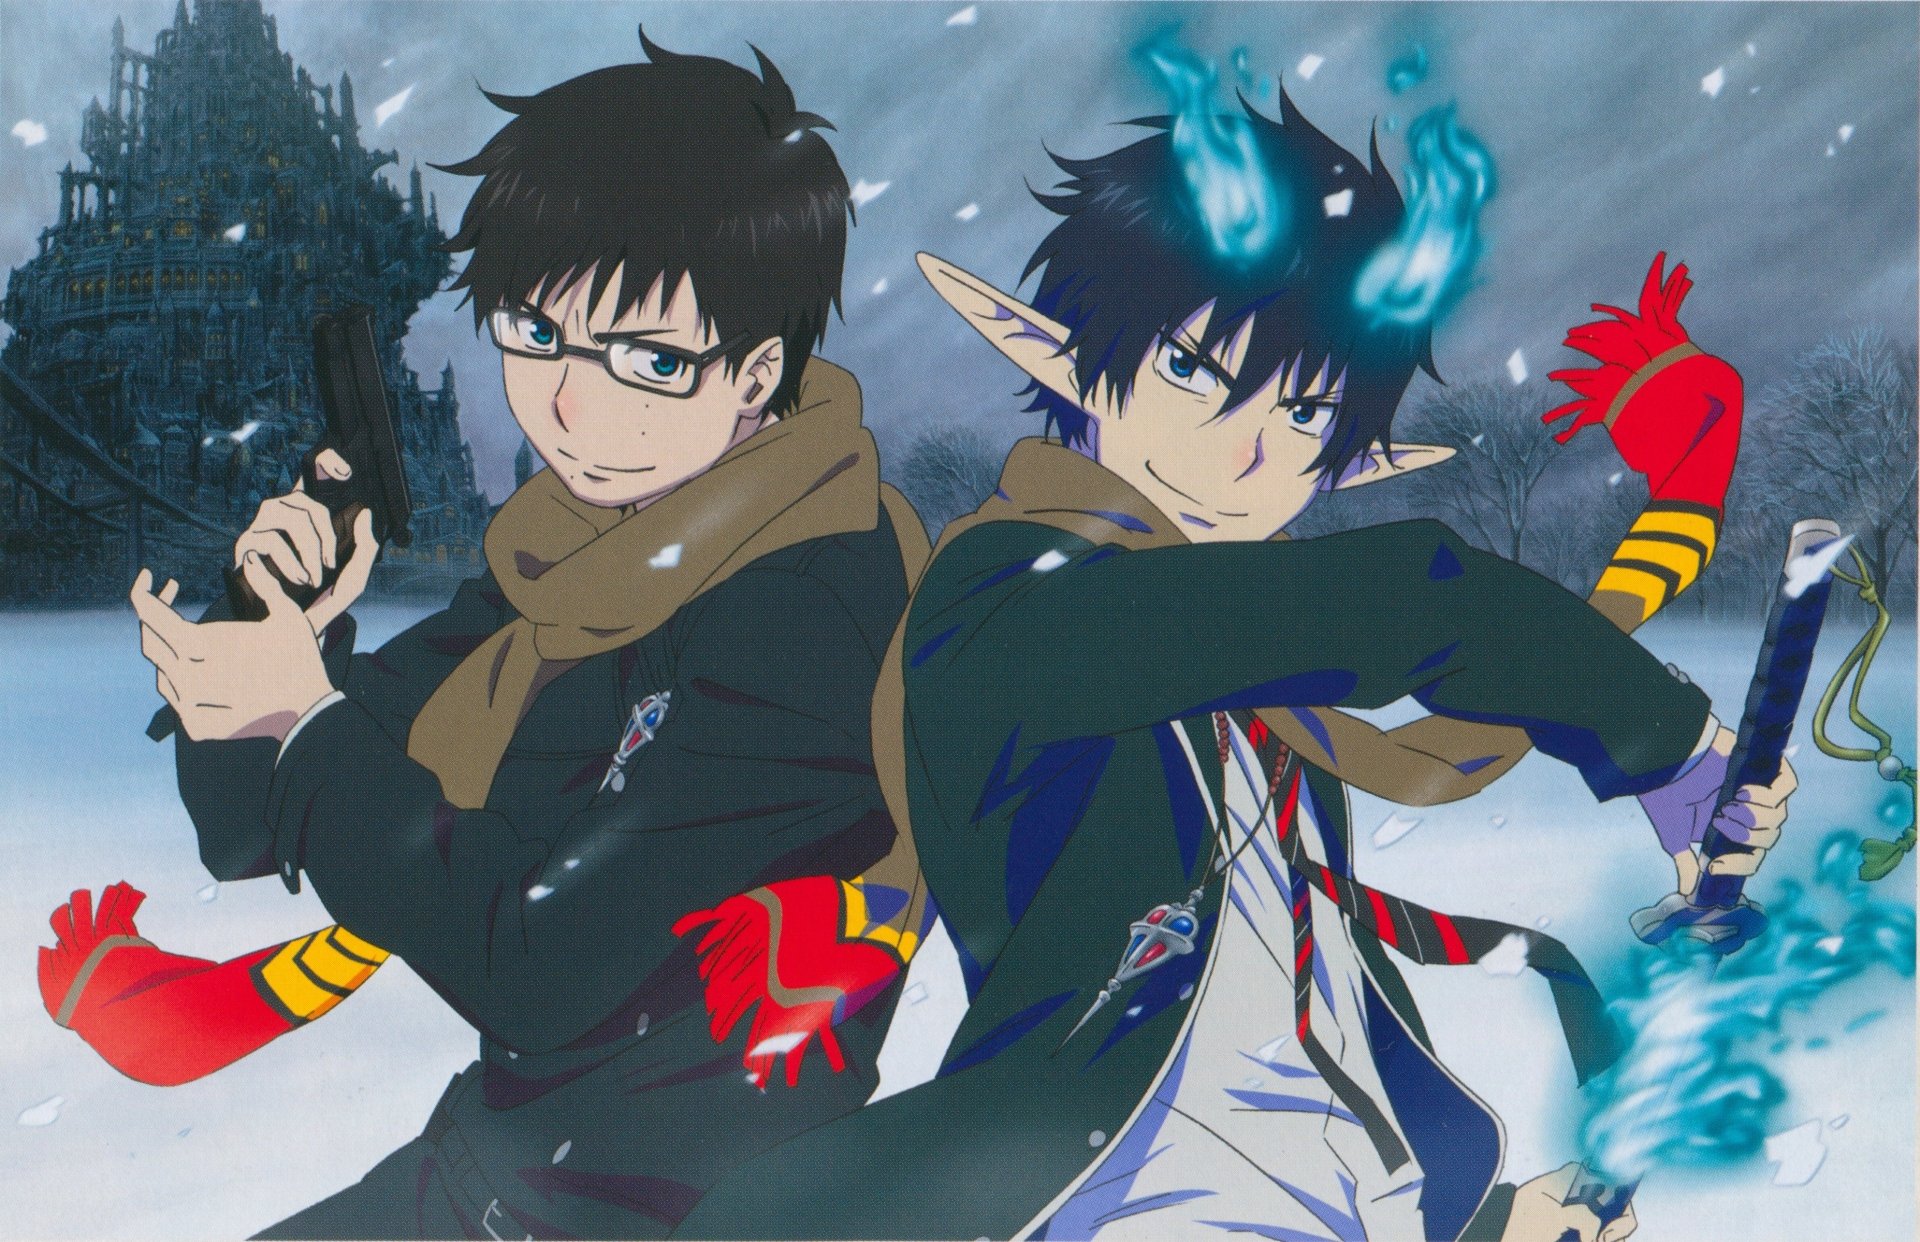 4. "Blue Exorcist" - wide 1